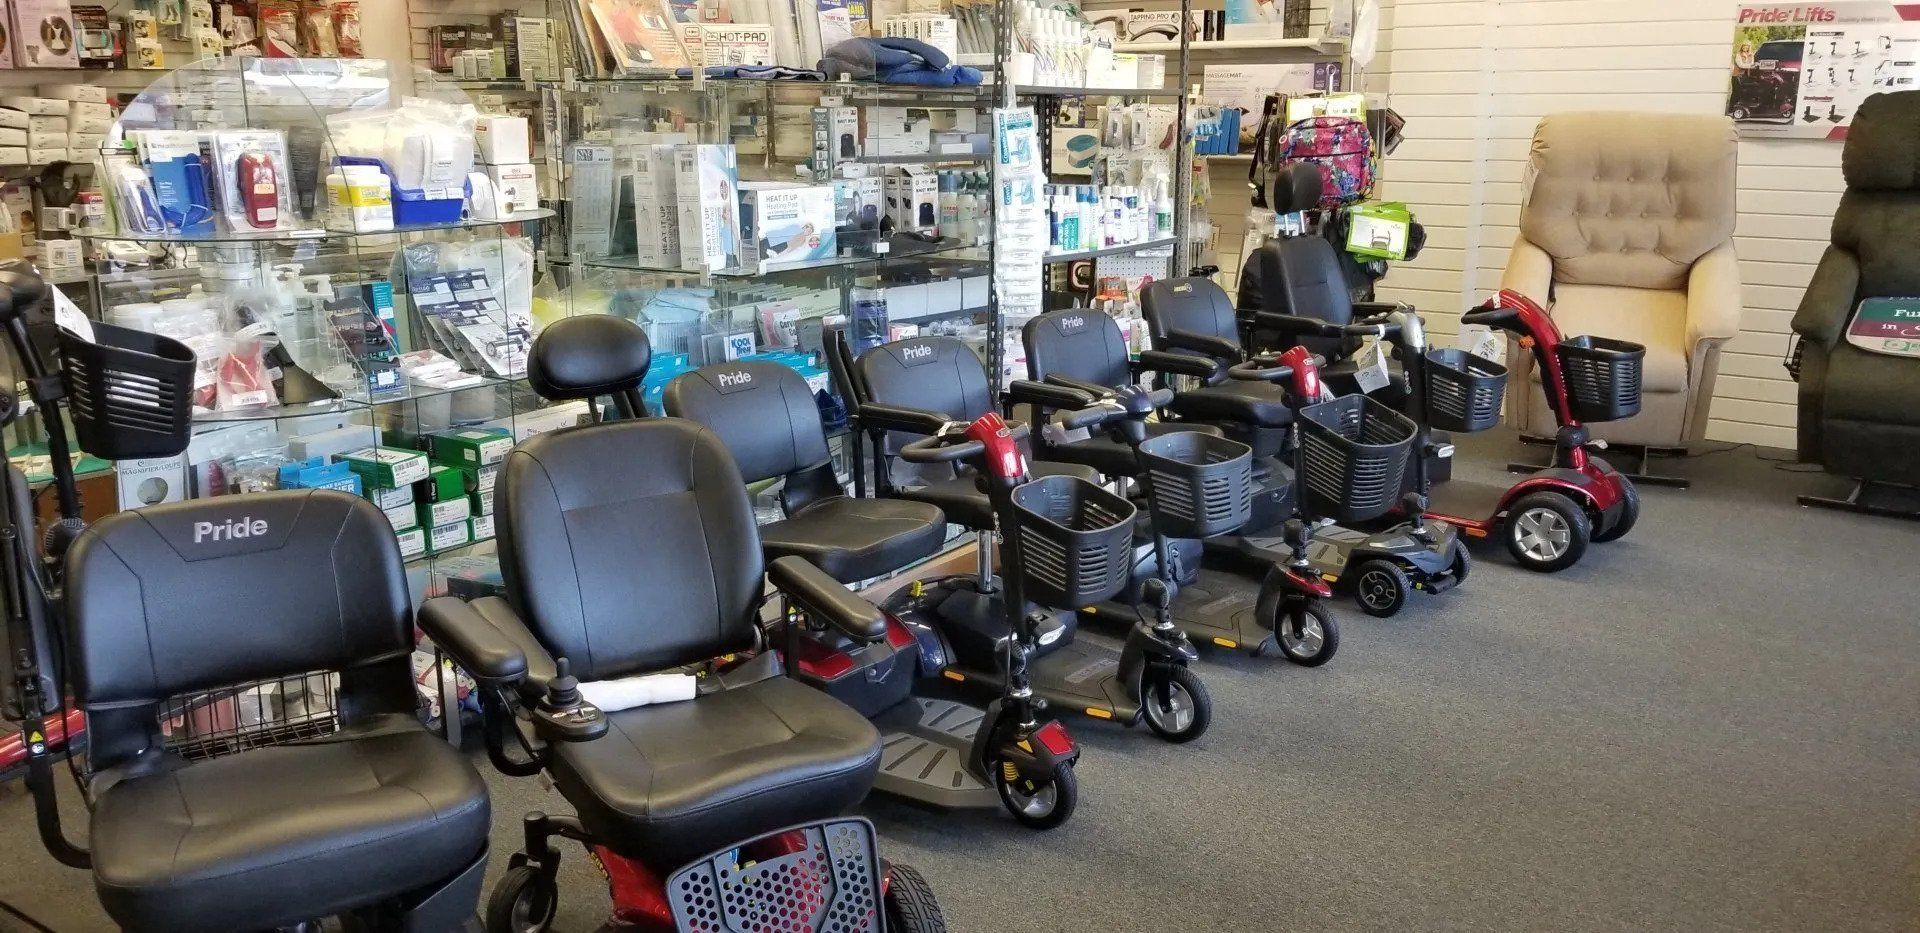 power wheelchairs inside the shop